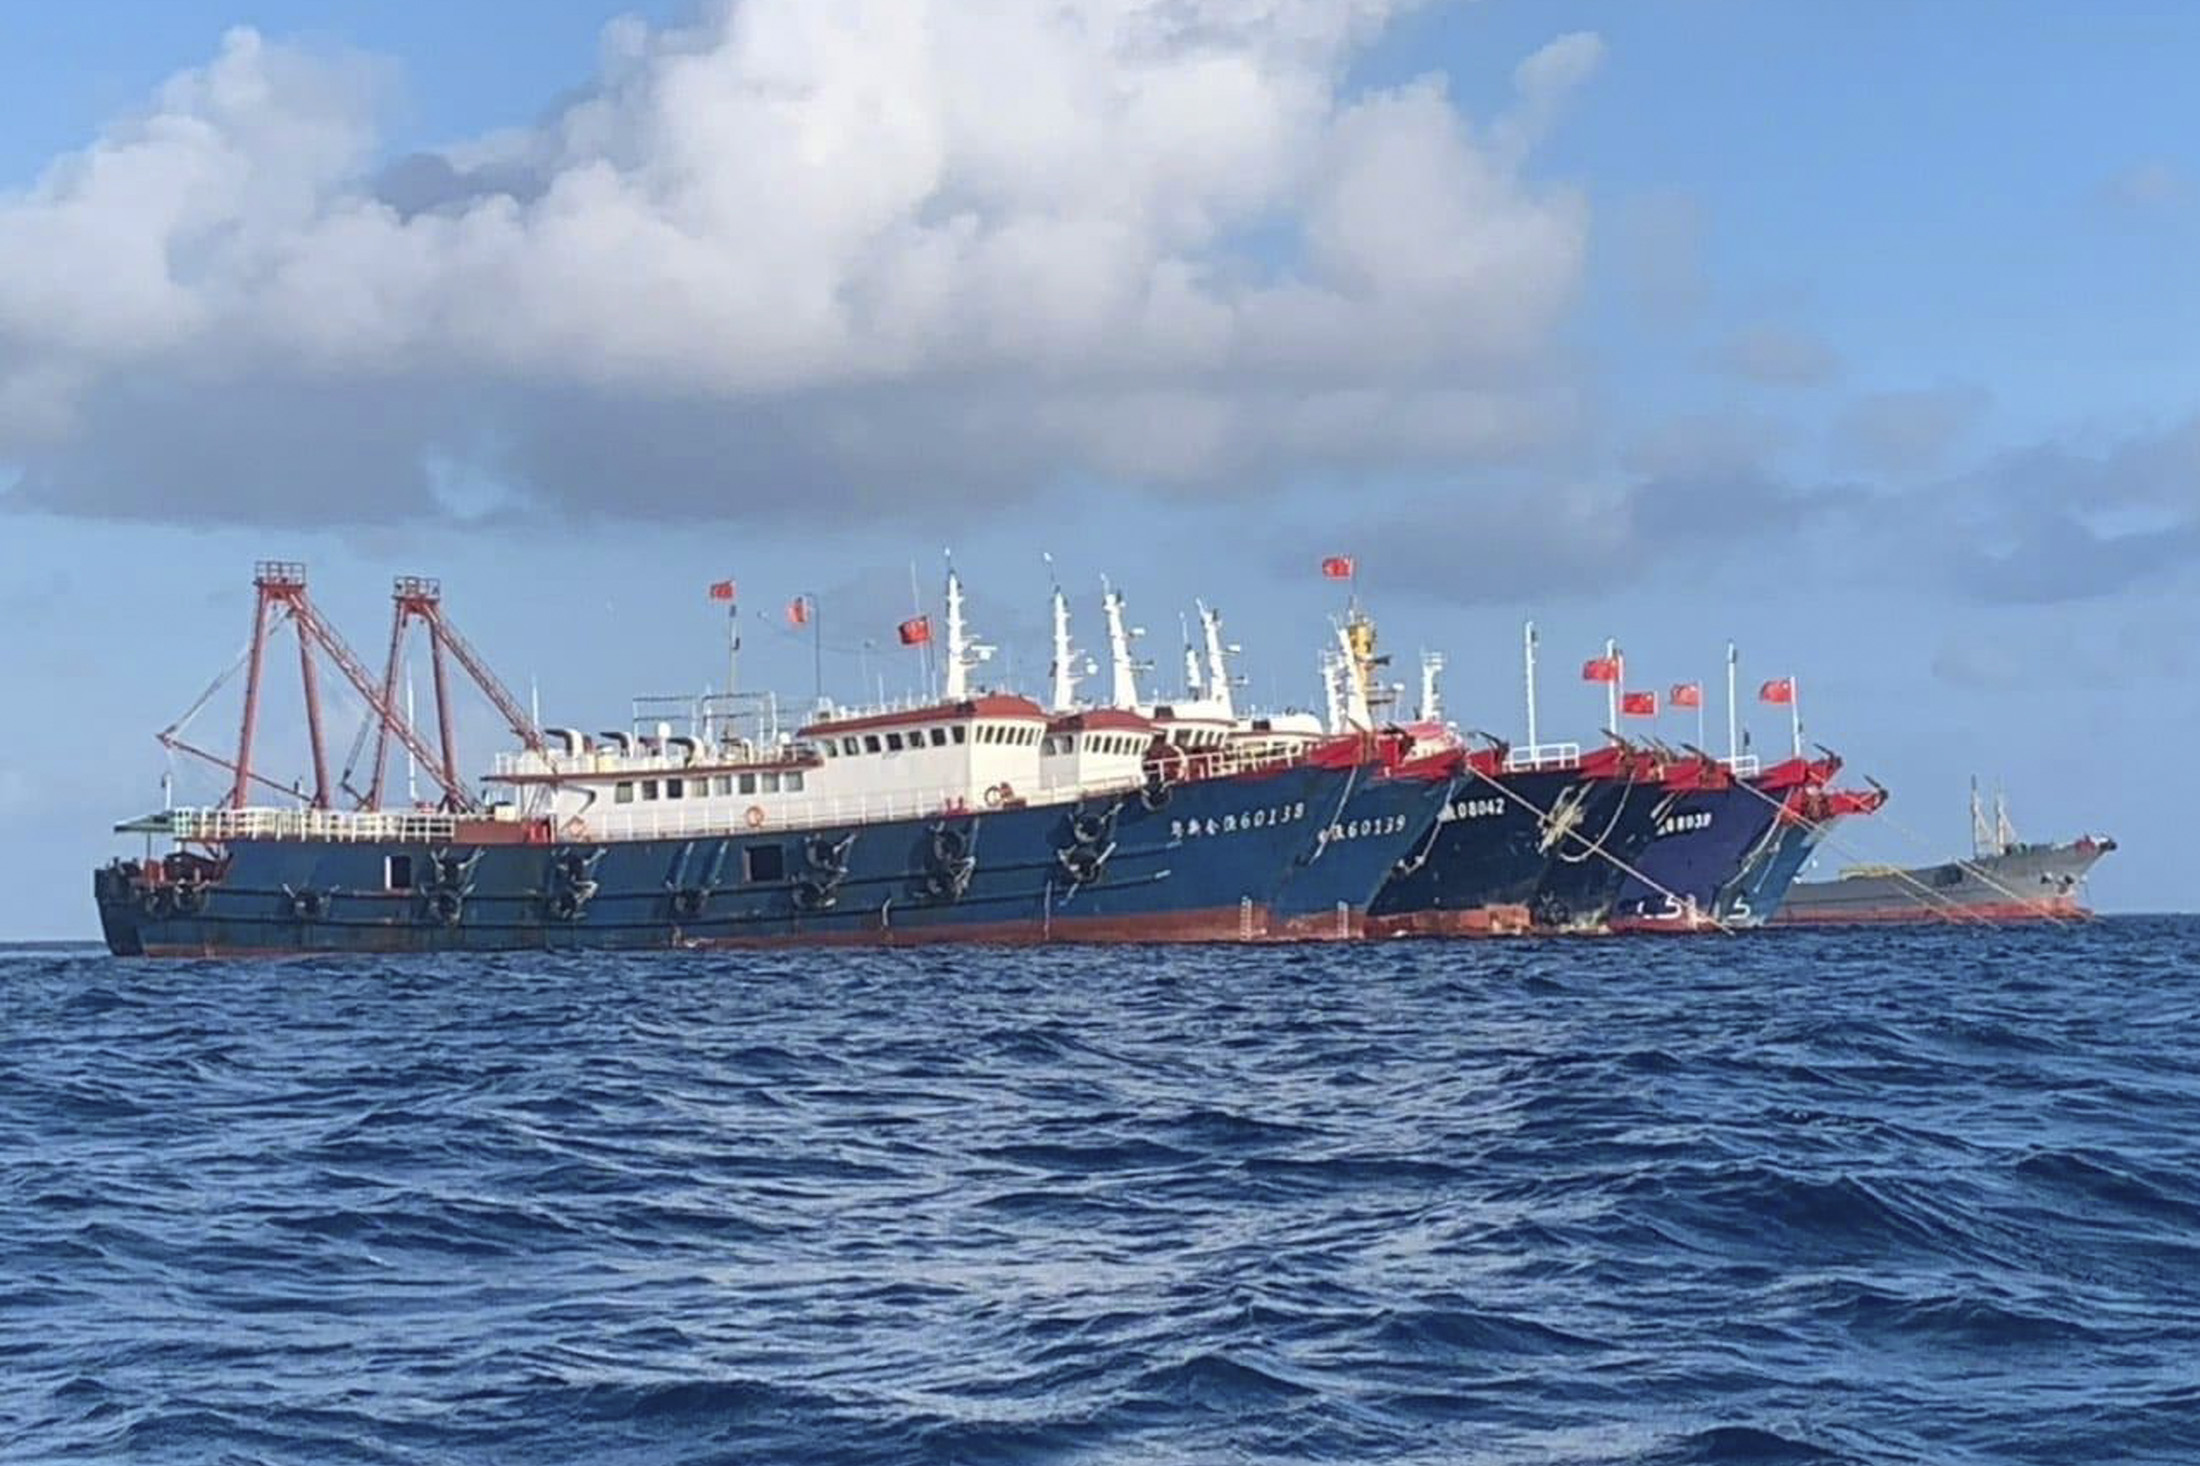 Chinese vessels moored at Whitsun Reef on March 27, 2021.